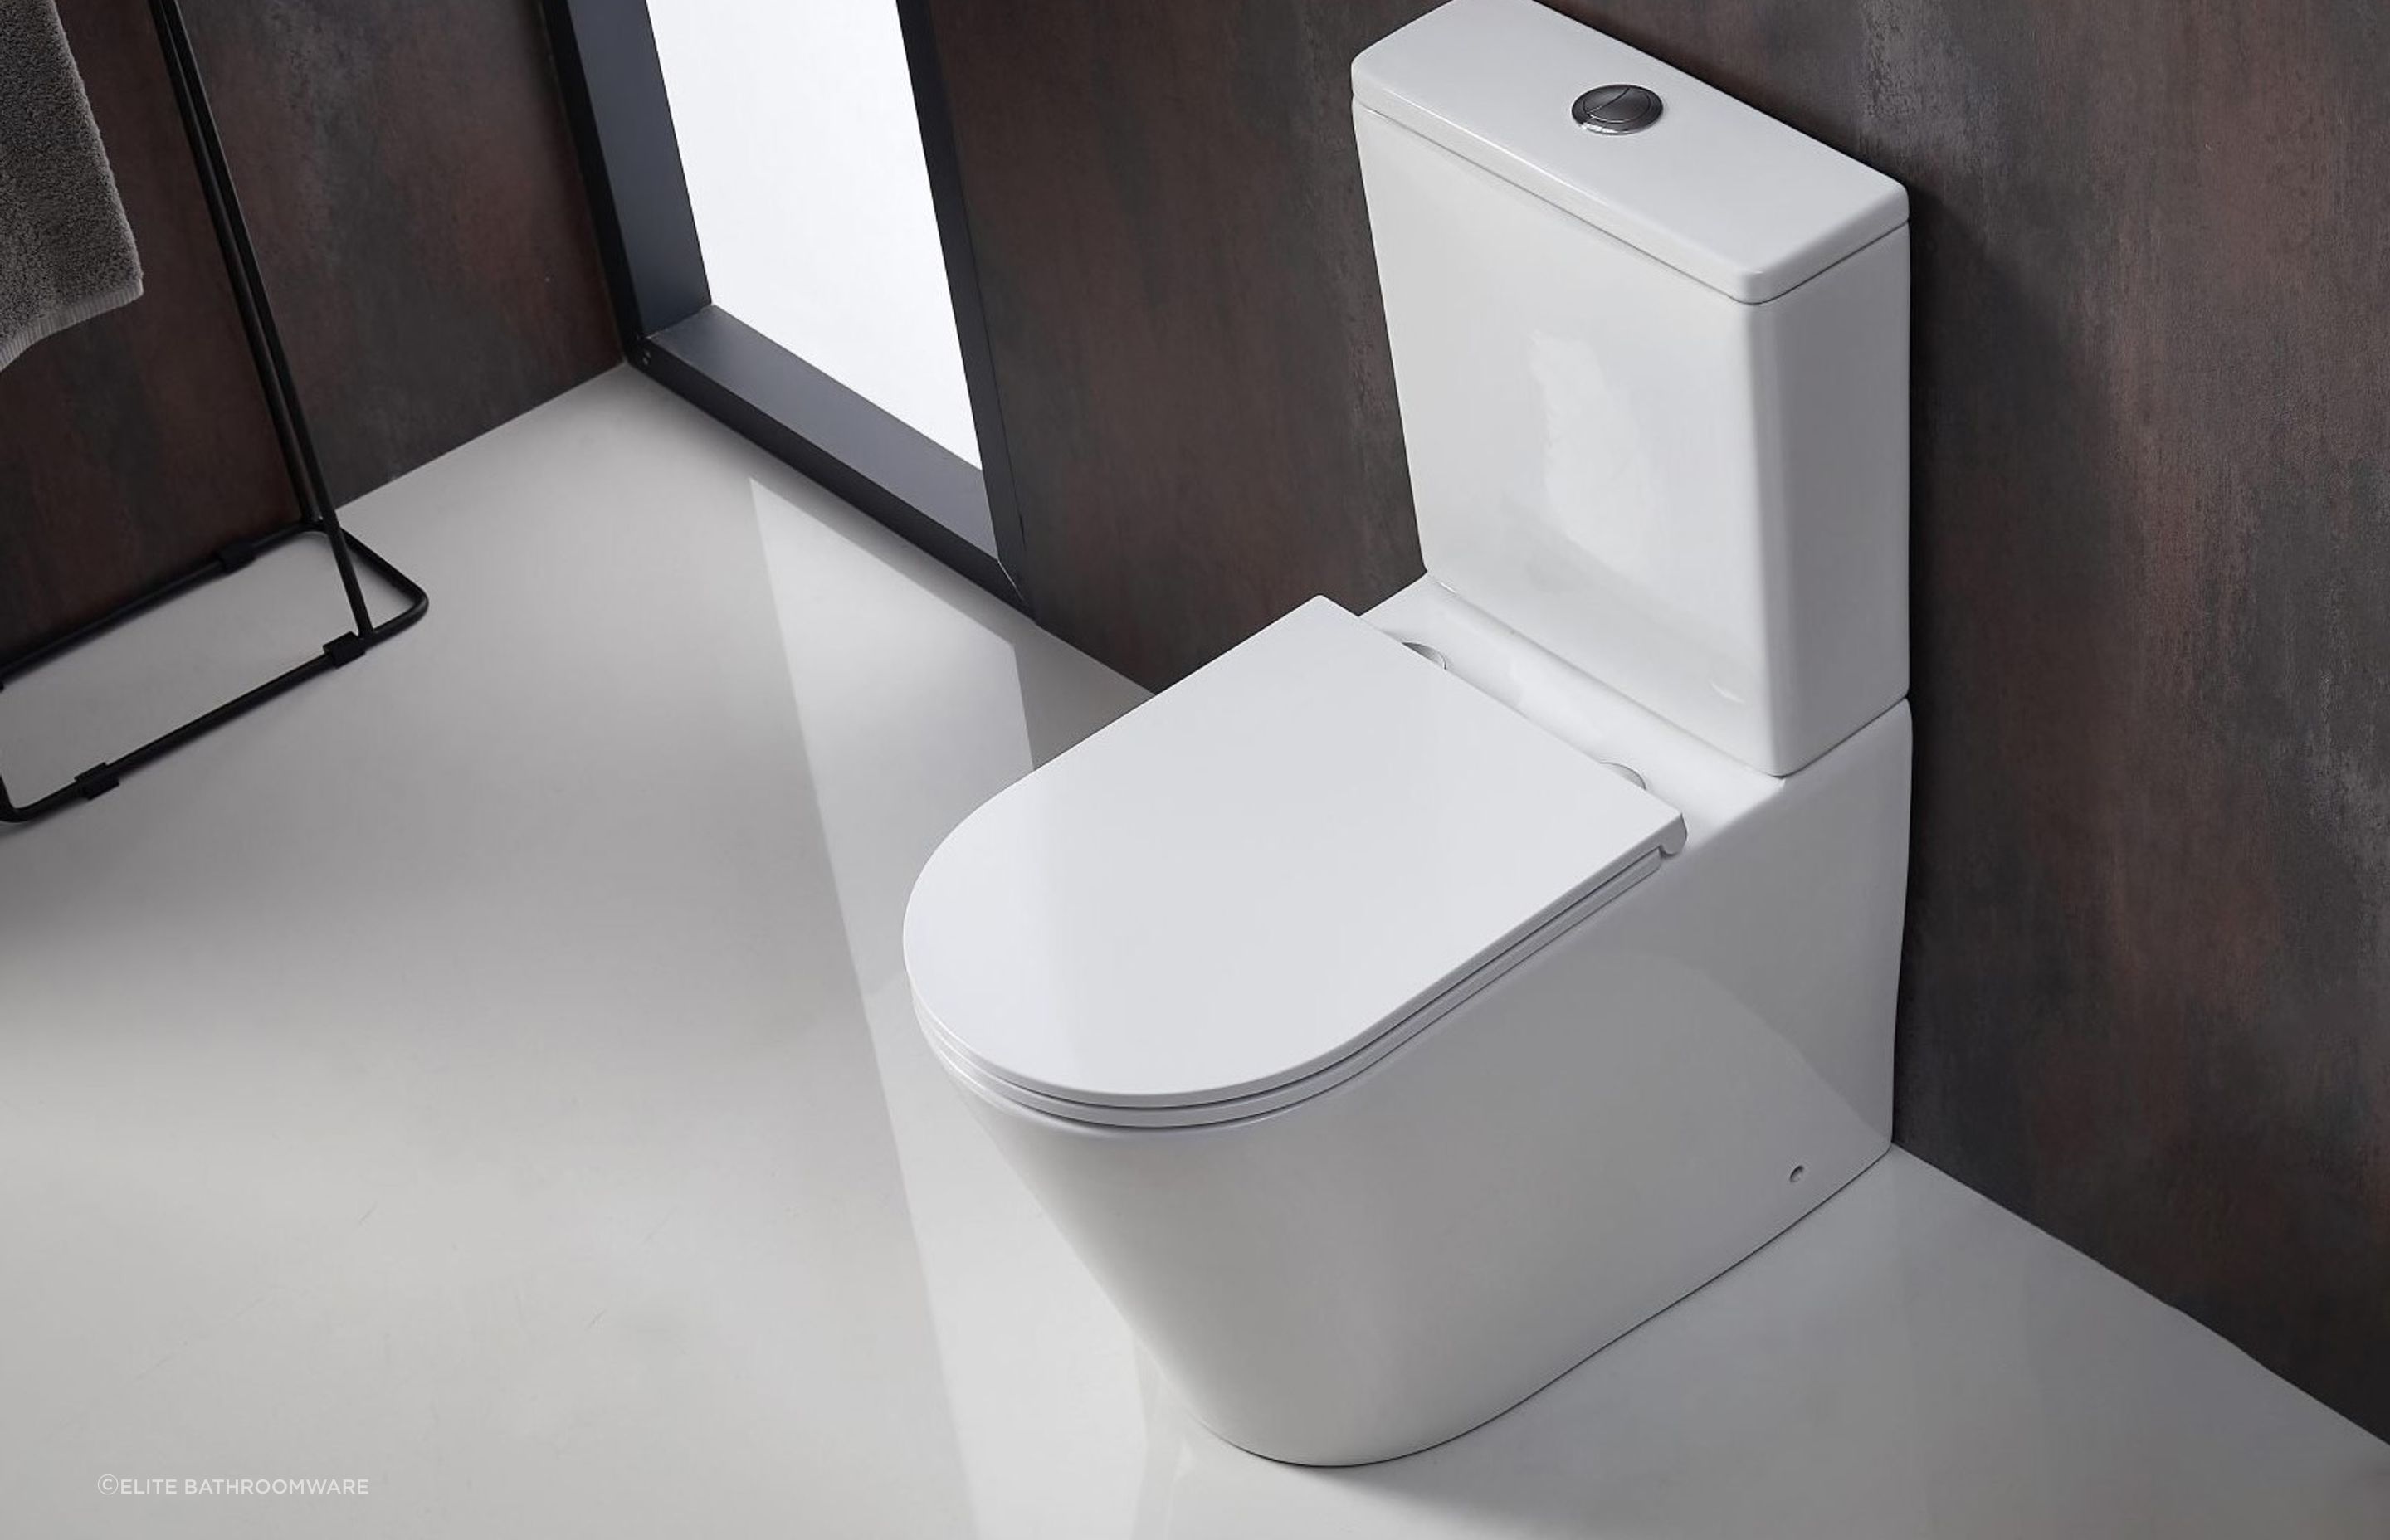 With a WELS 4 star rating and a rimless pan, the Code Pure Overheight Toilet Suite is a water efficient and easy to clean solution for the modern home.